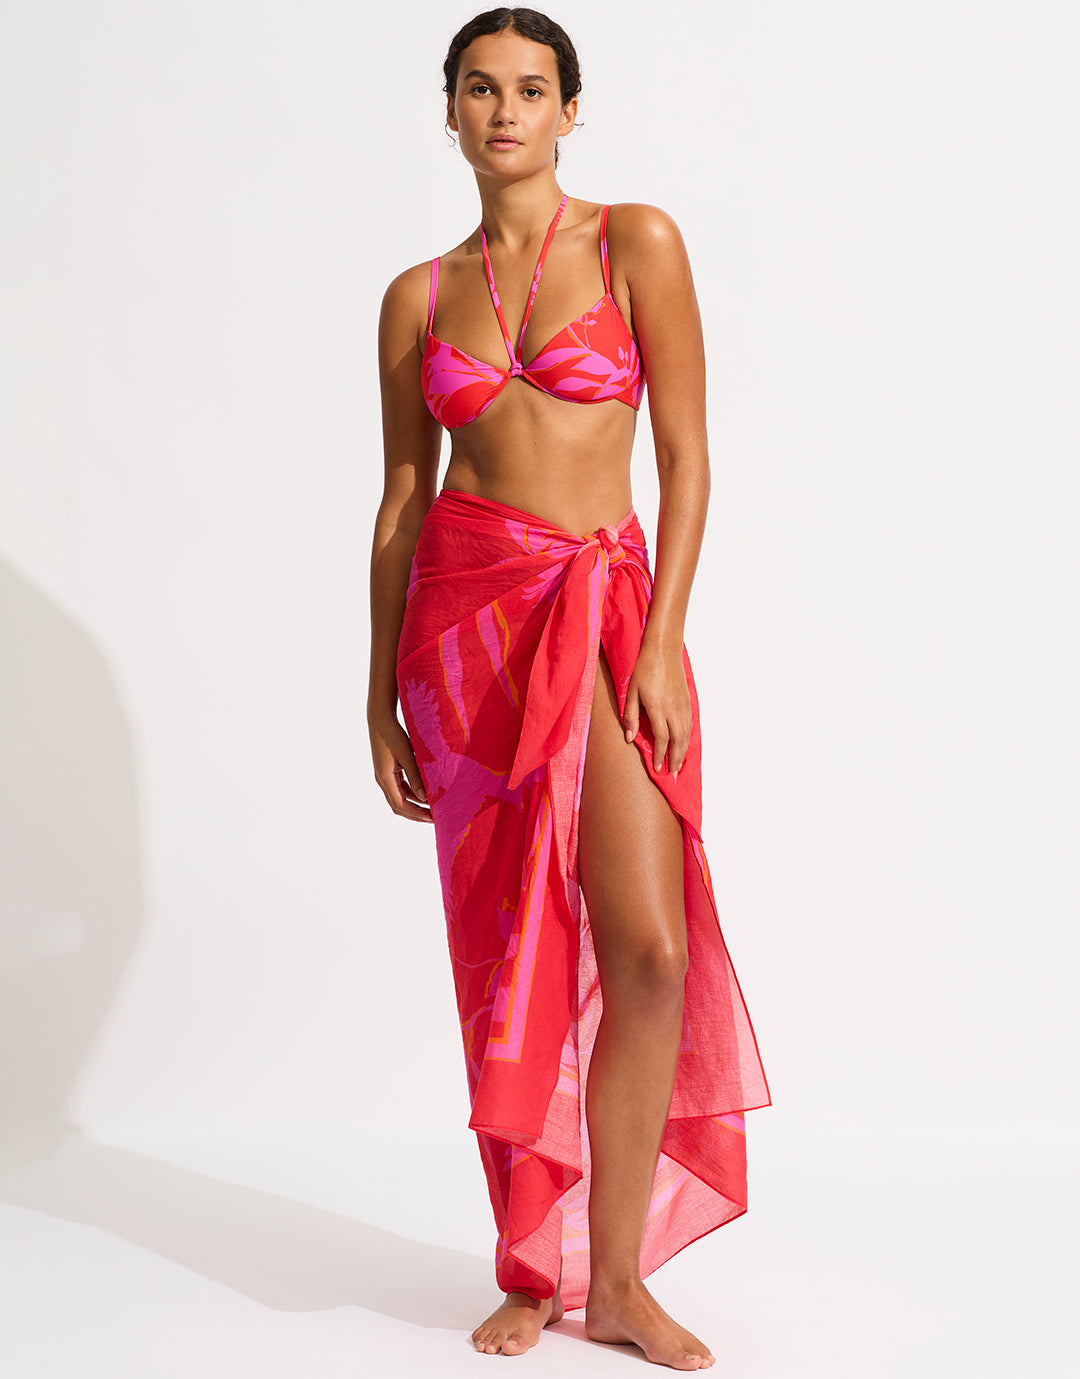 Birds of Paradise Sarong - Chilli Red - Simply Beach UK